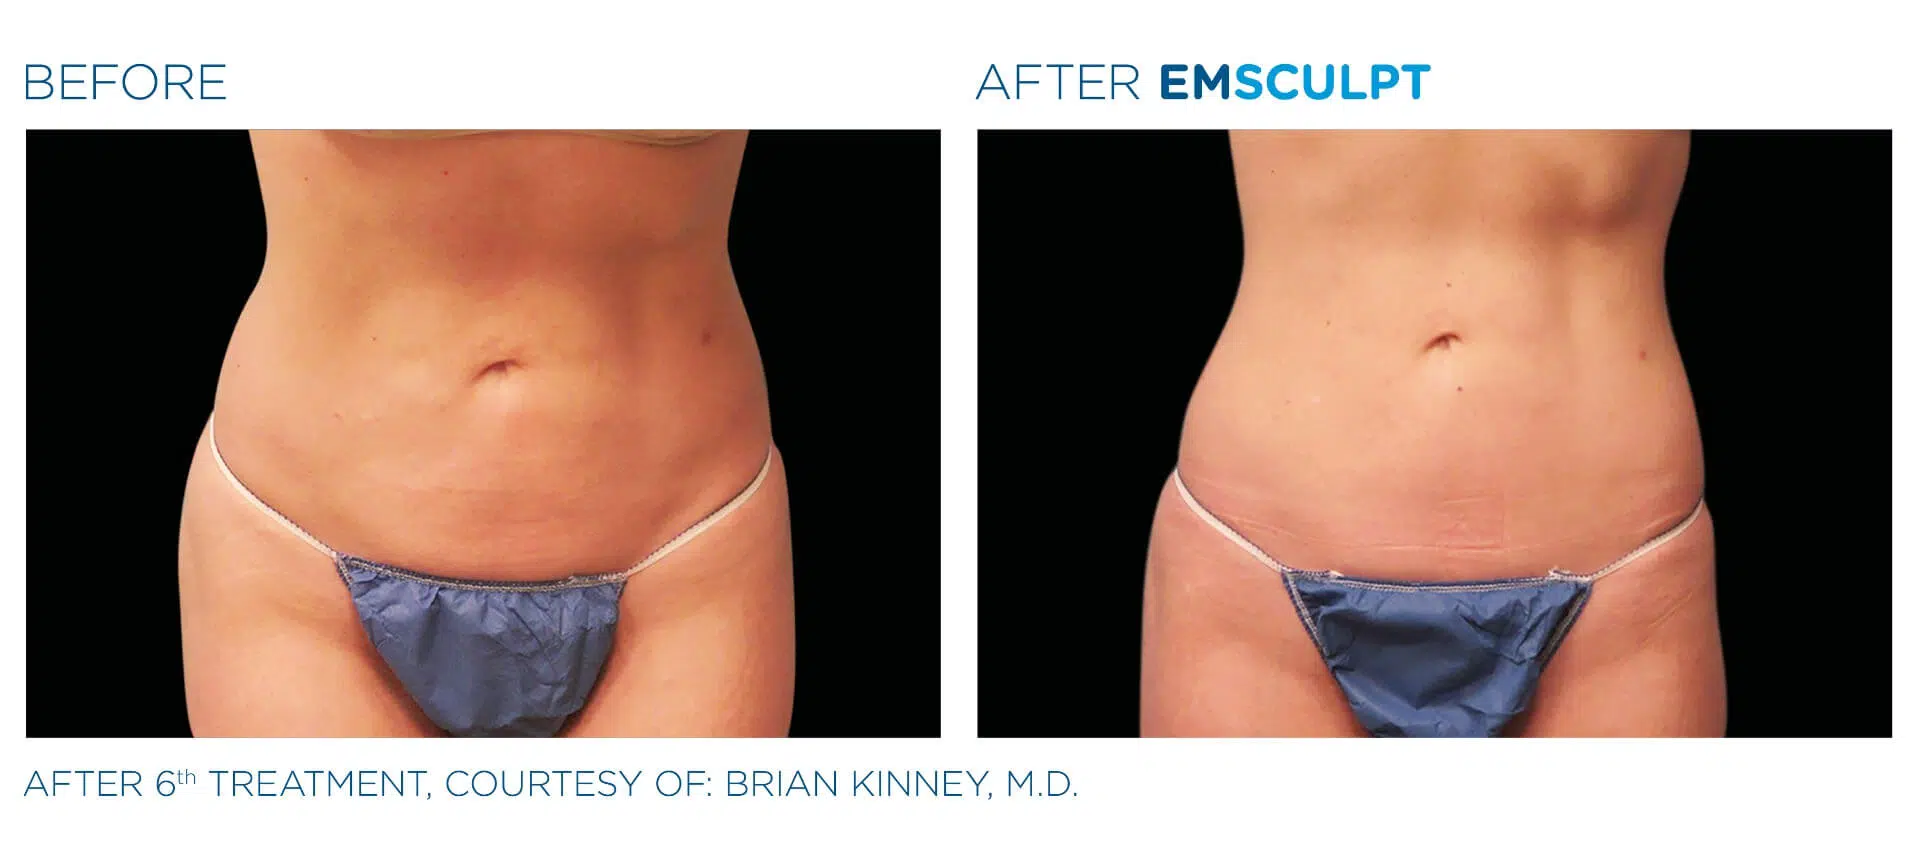 Emsculpt abdominal are before and after results.